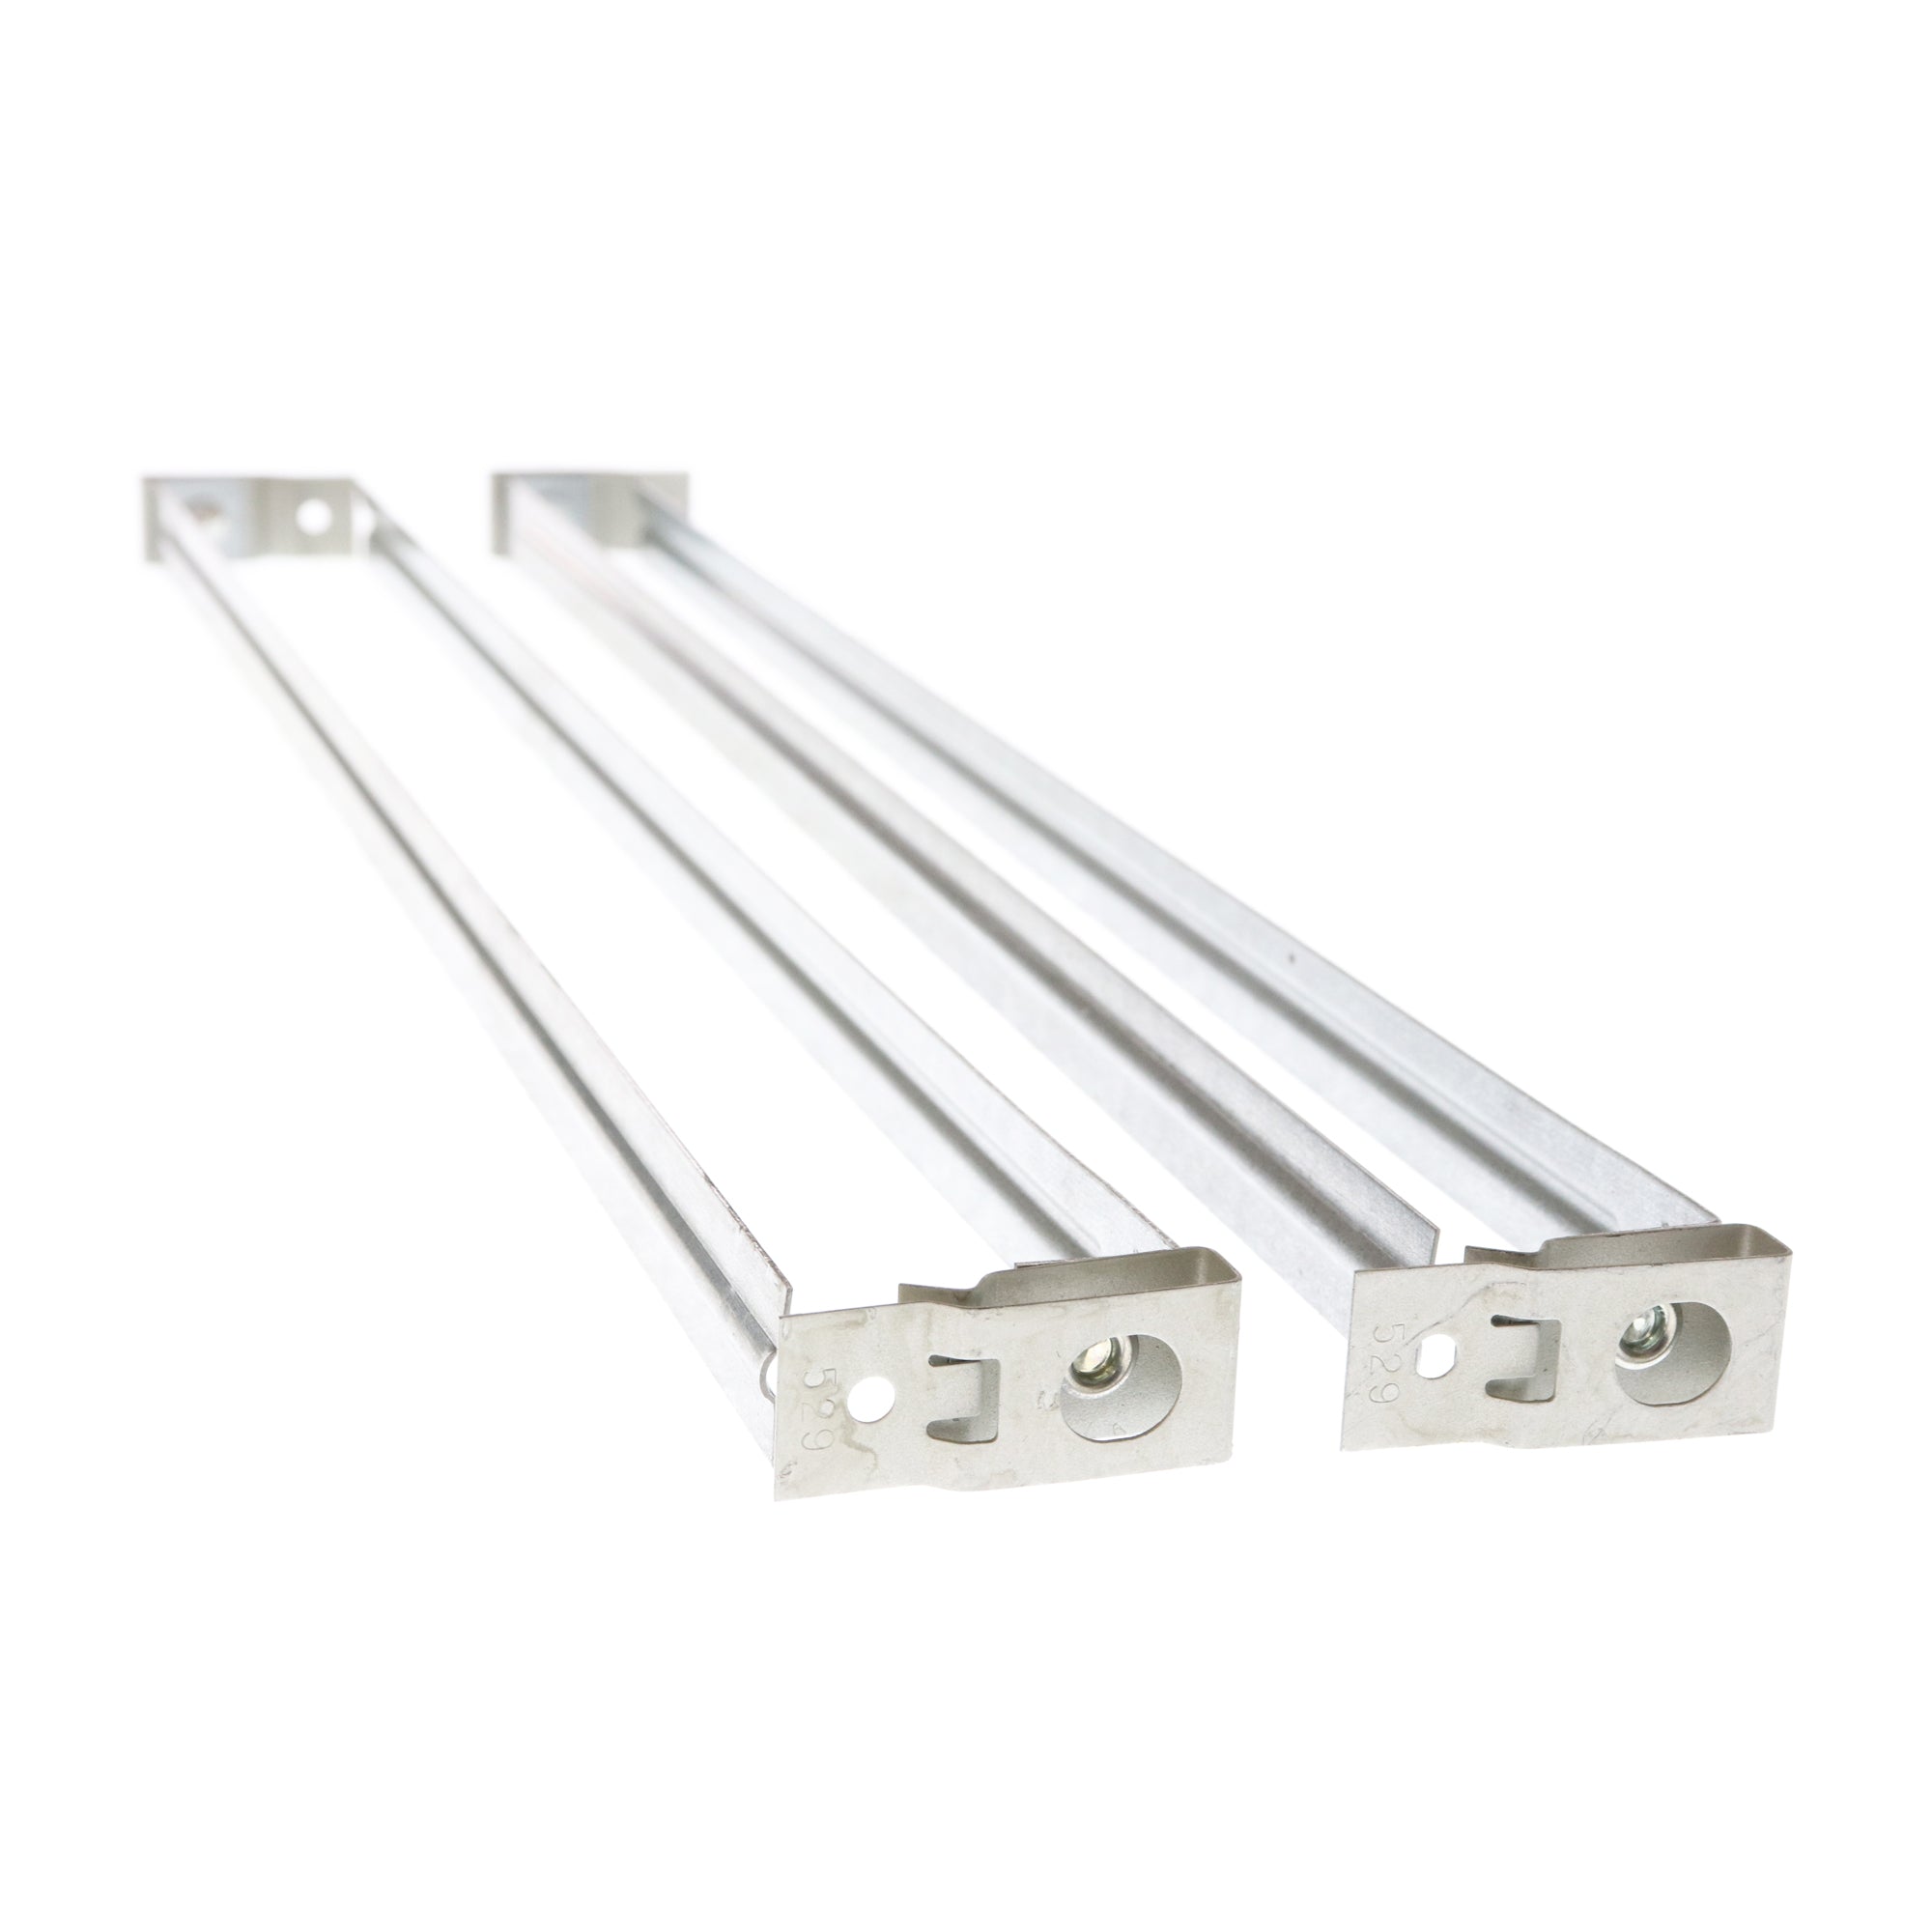 Erico Caddy Cadwal, CADDY ERICO 517C T-GRID RECESSED LIGHT FIXTURE SUSPENSION BAR, (10-PACK)